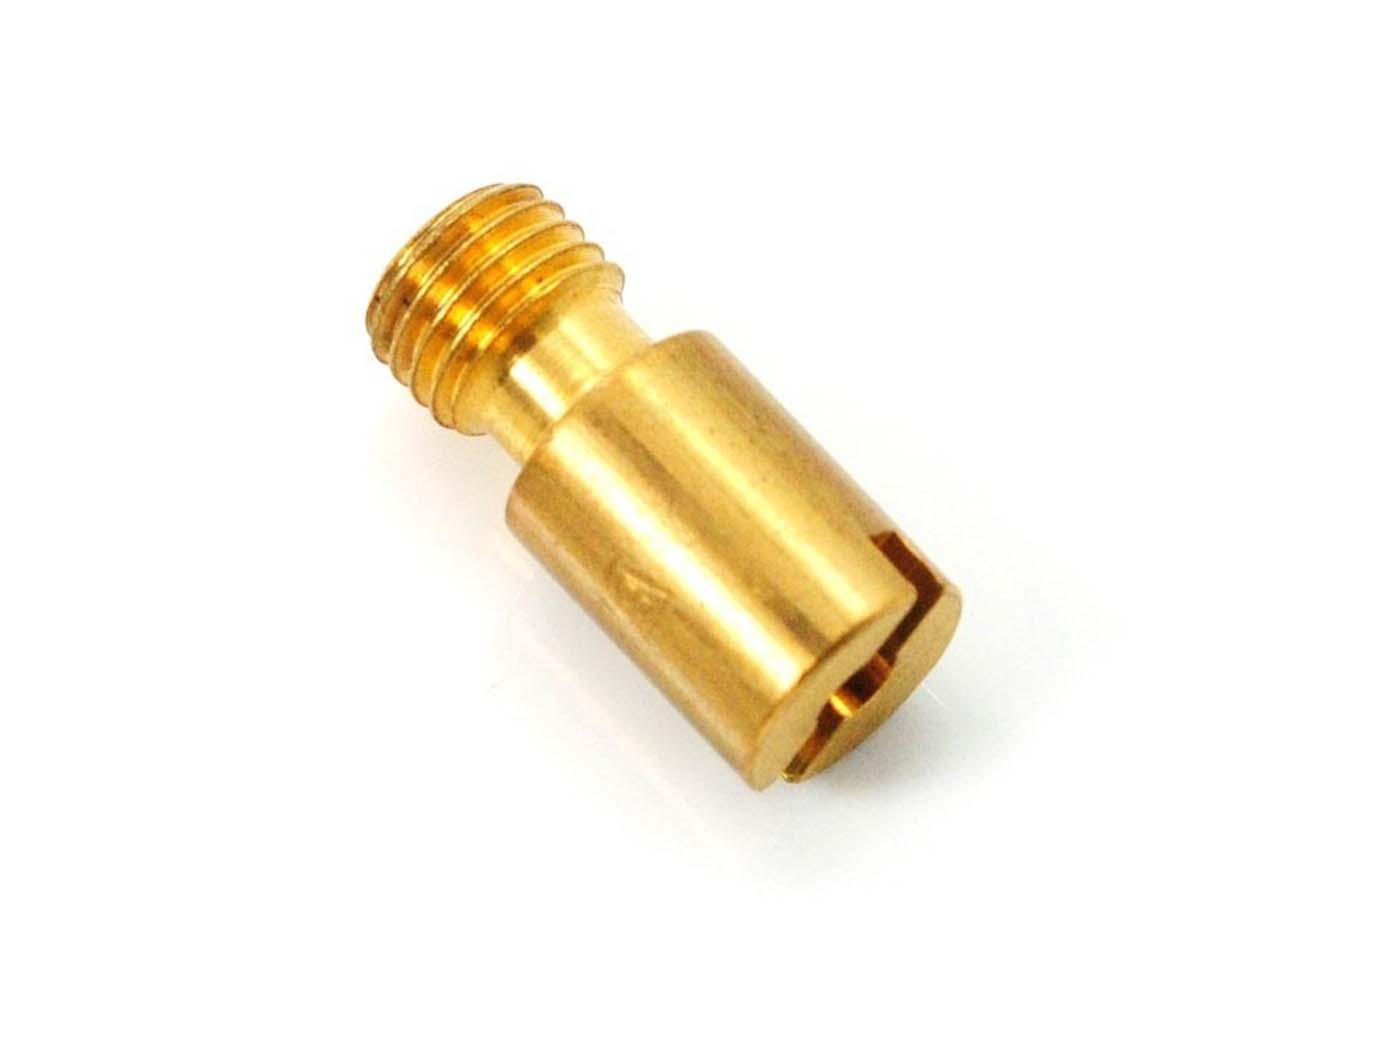 Needle Jet 2,15mm 45-141 For Bing Carburetor Type Side Float For Puch MS, Puch VS, Puch VZ, Puch DS, Puch M, Zündapp Super Combinette C 50